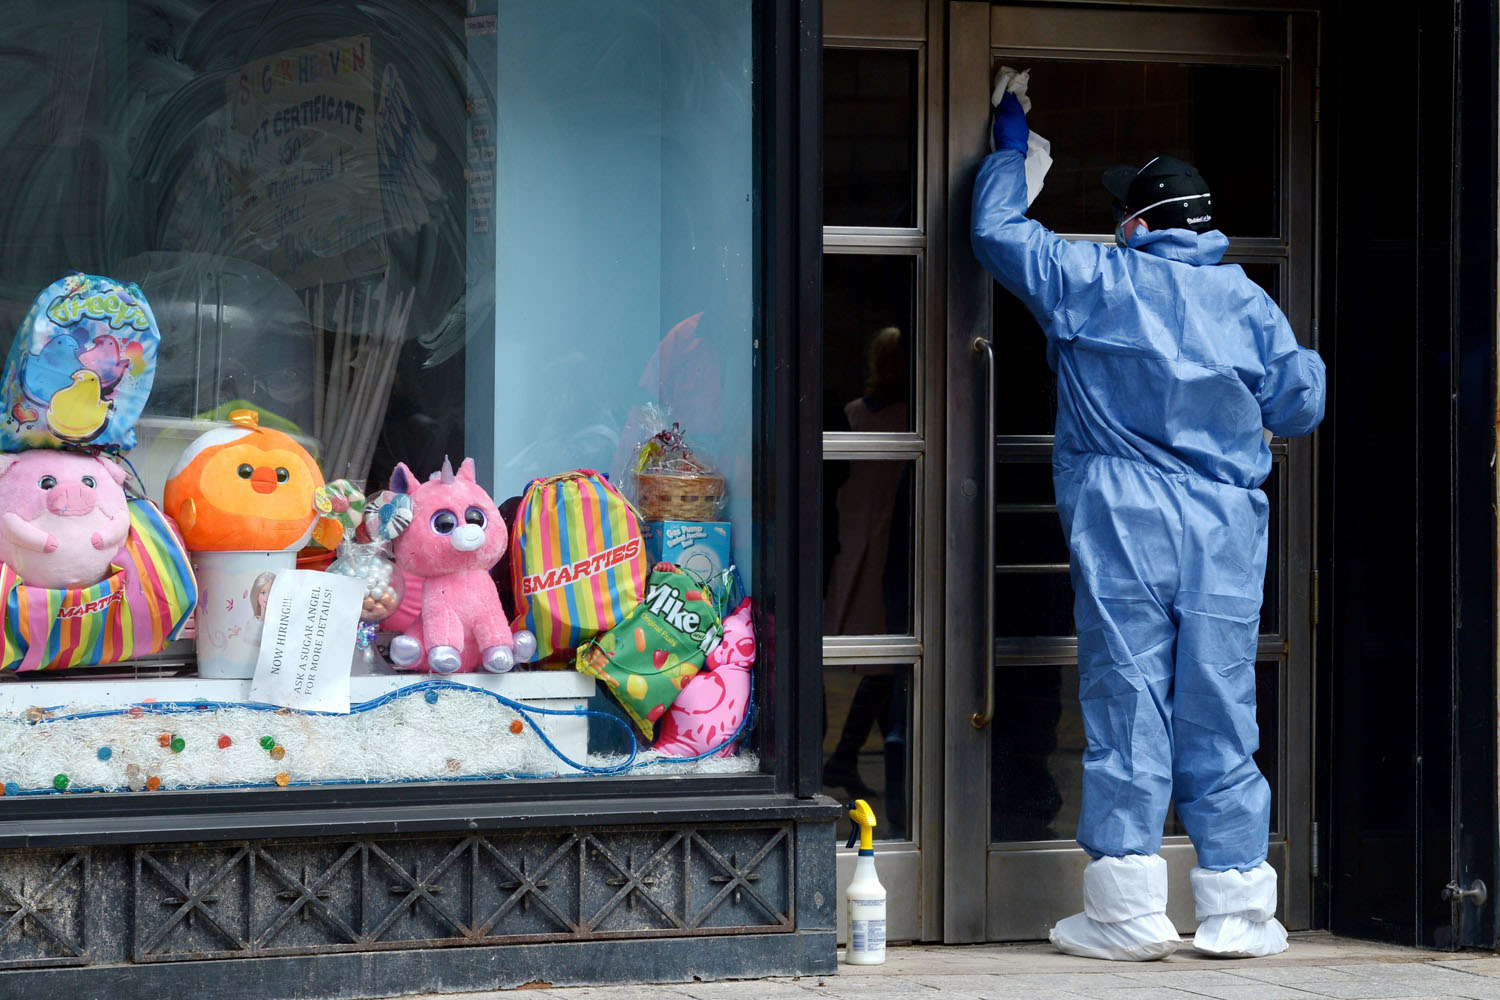 April 24, 2013. A man works on making repairs to businesses near the site of the second bombing at the finish line of the Boston Marathon on Boylston Street in Boston.